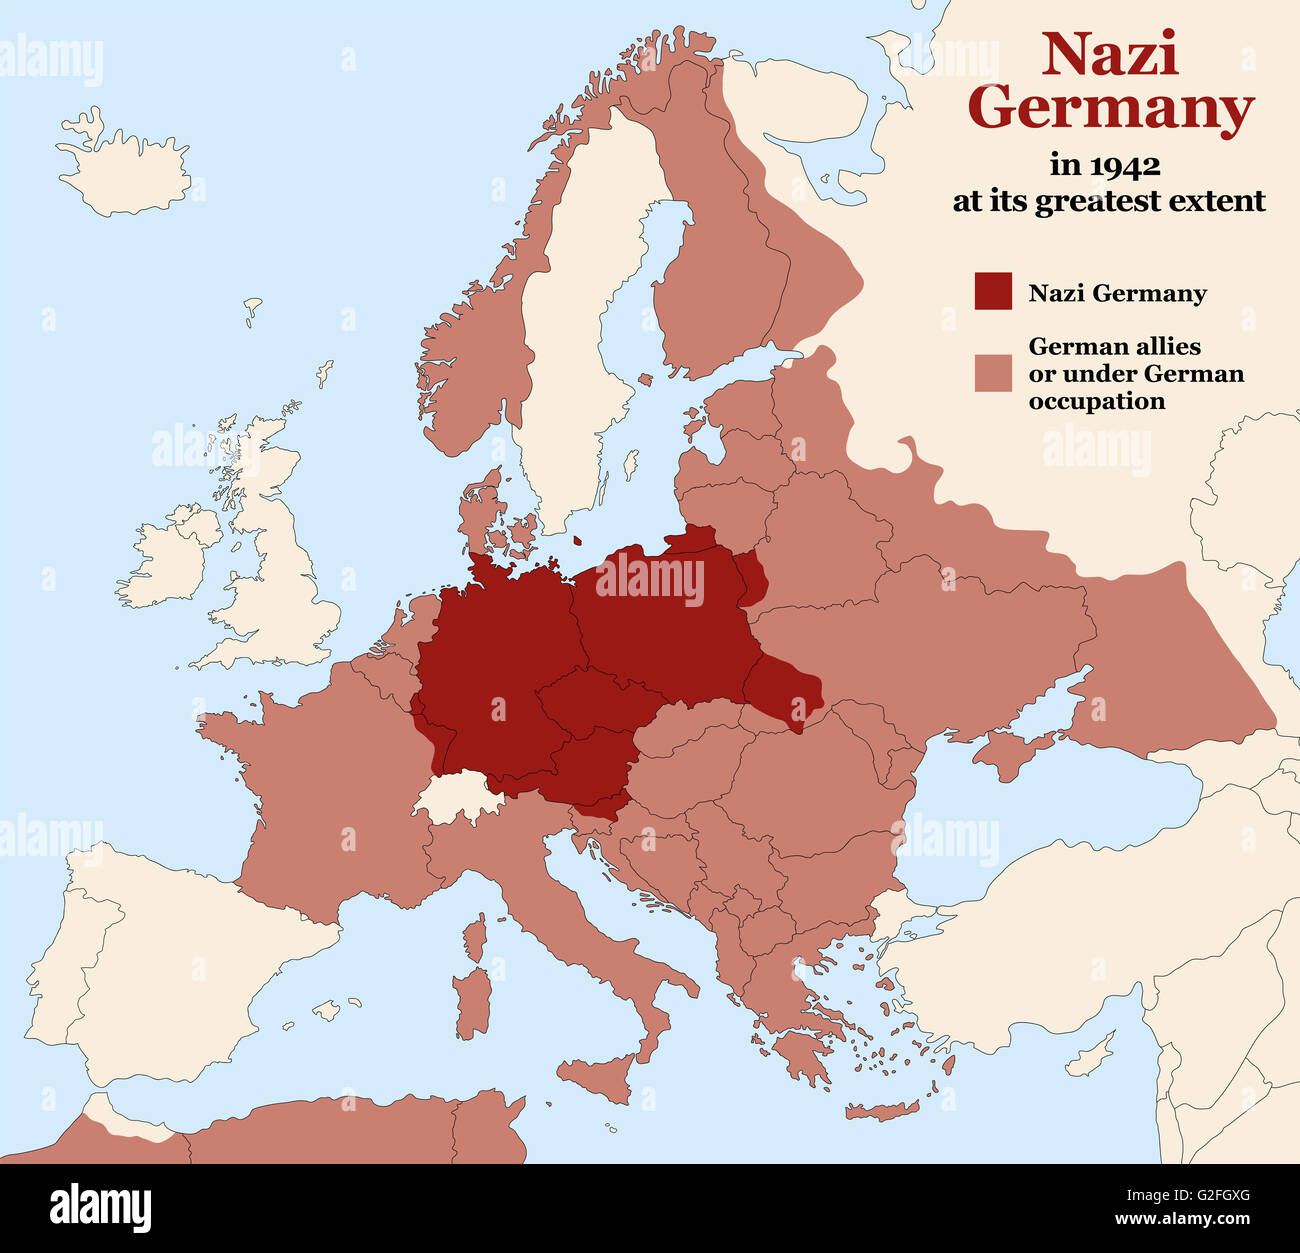 Nazi Germany Third Reich At Its Greatest Extent In 1942 Map Of